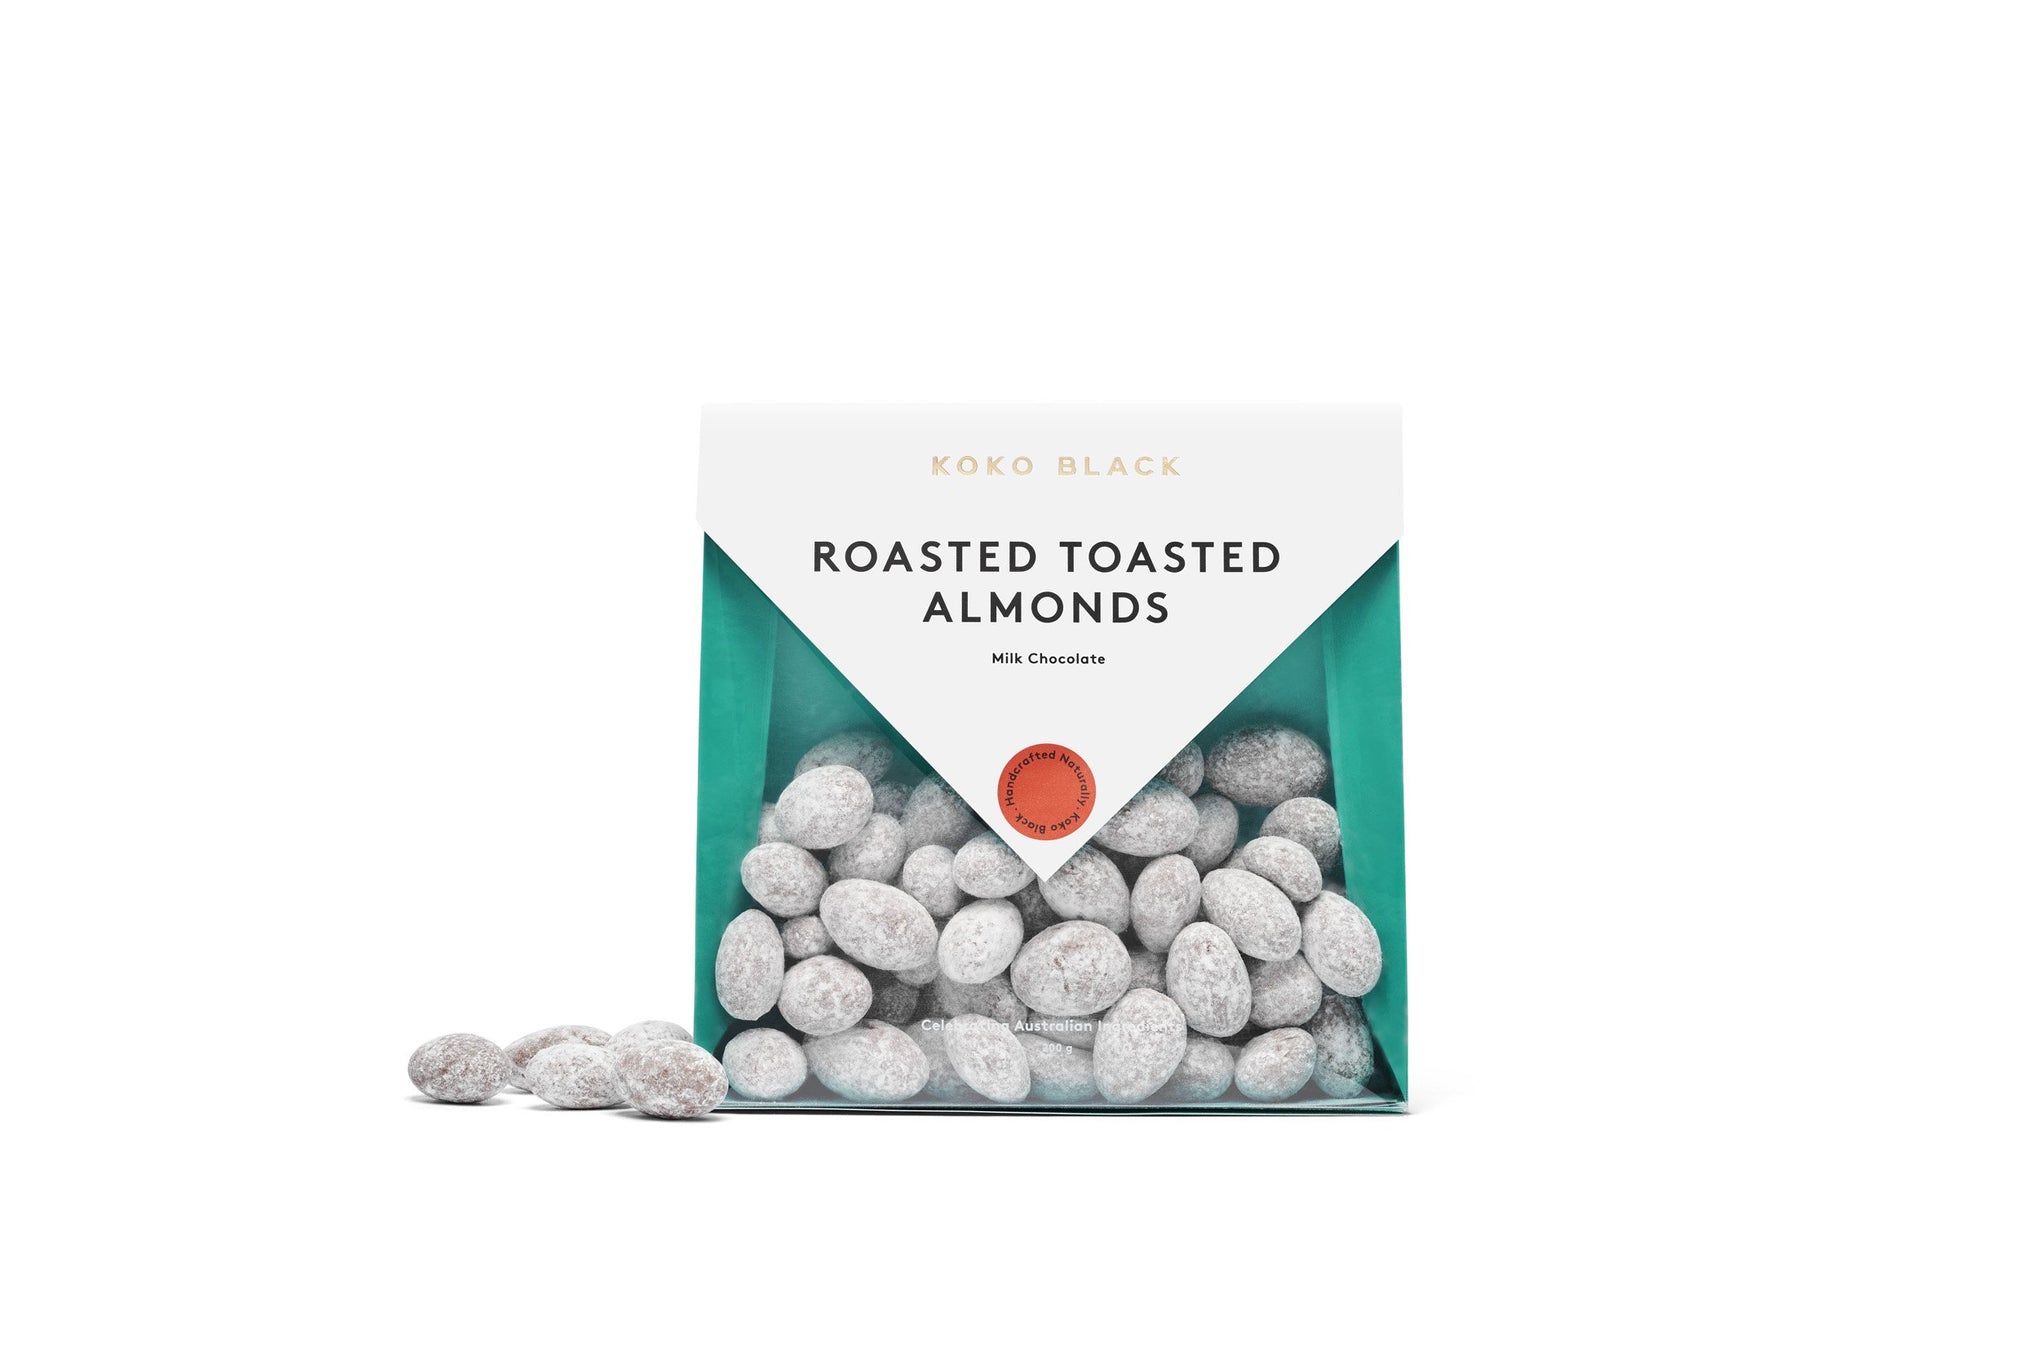 Dusted almonds beside packaging